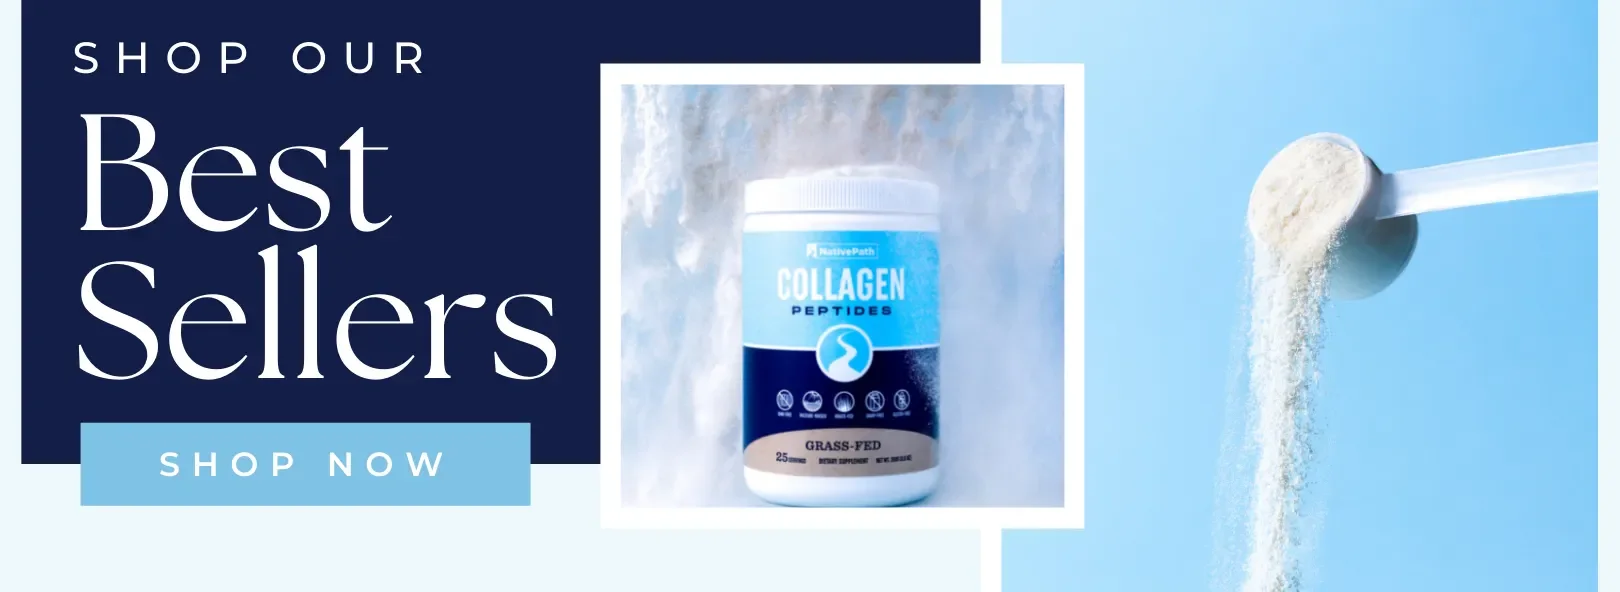 NativePath Grass-Fed Collagen Banner: Shop Our Best Sellers